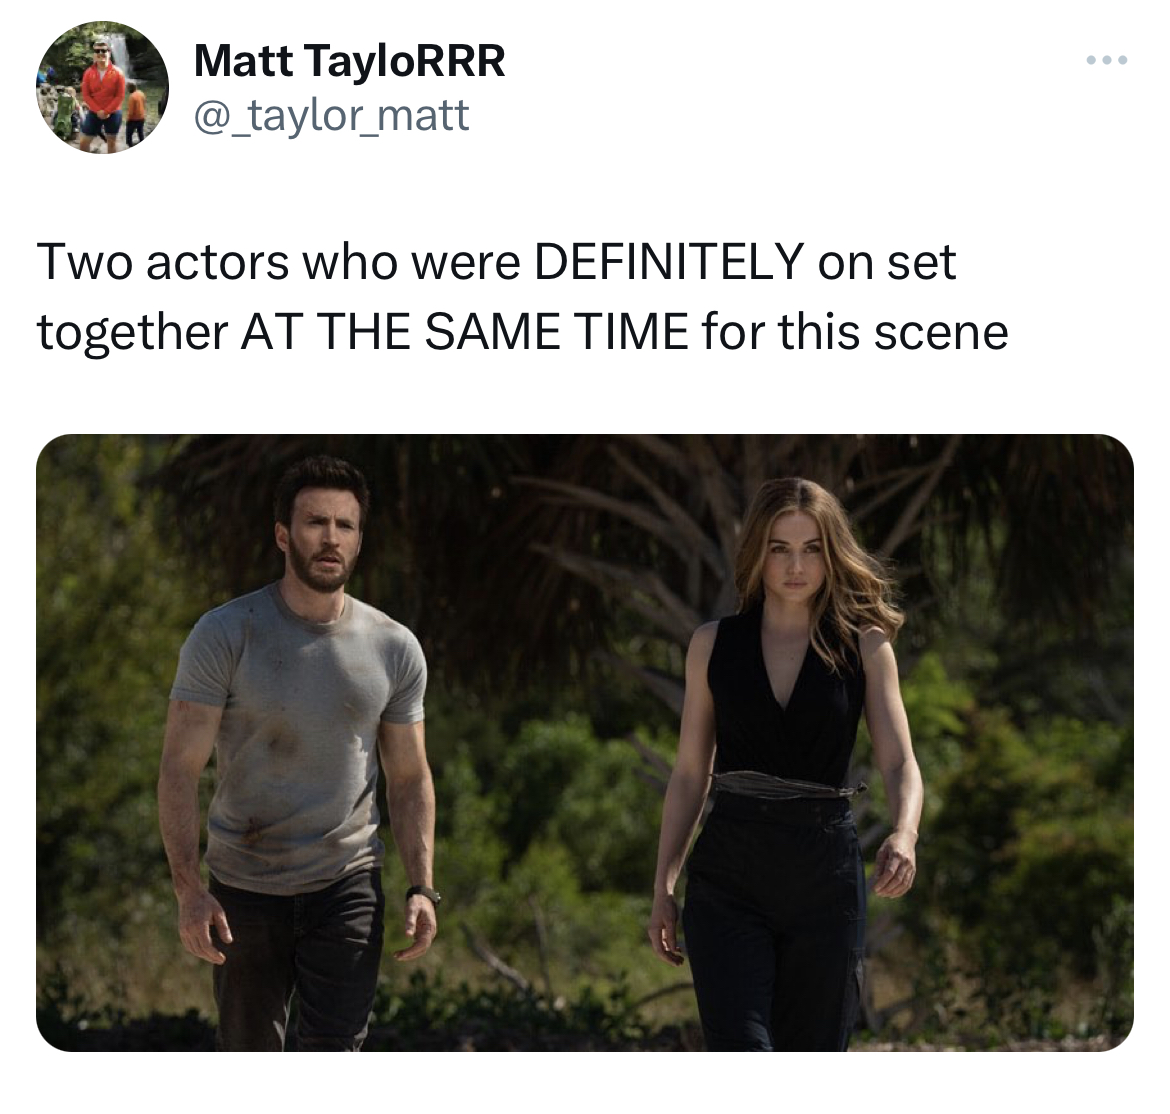 funny tweets - Ghosted - Matt TayloRRR Two actors who were Definitely on set together At The Same Time for this scene Ala